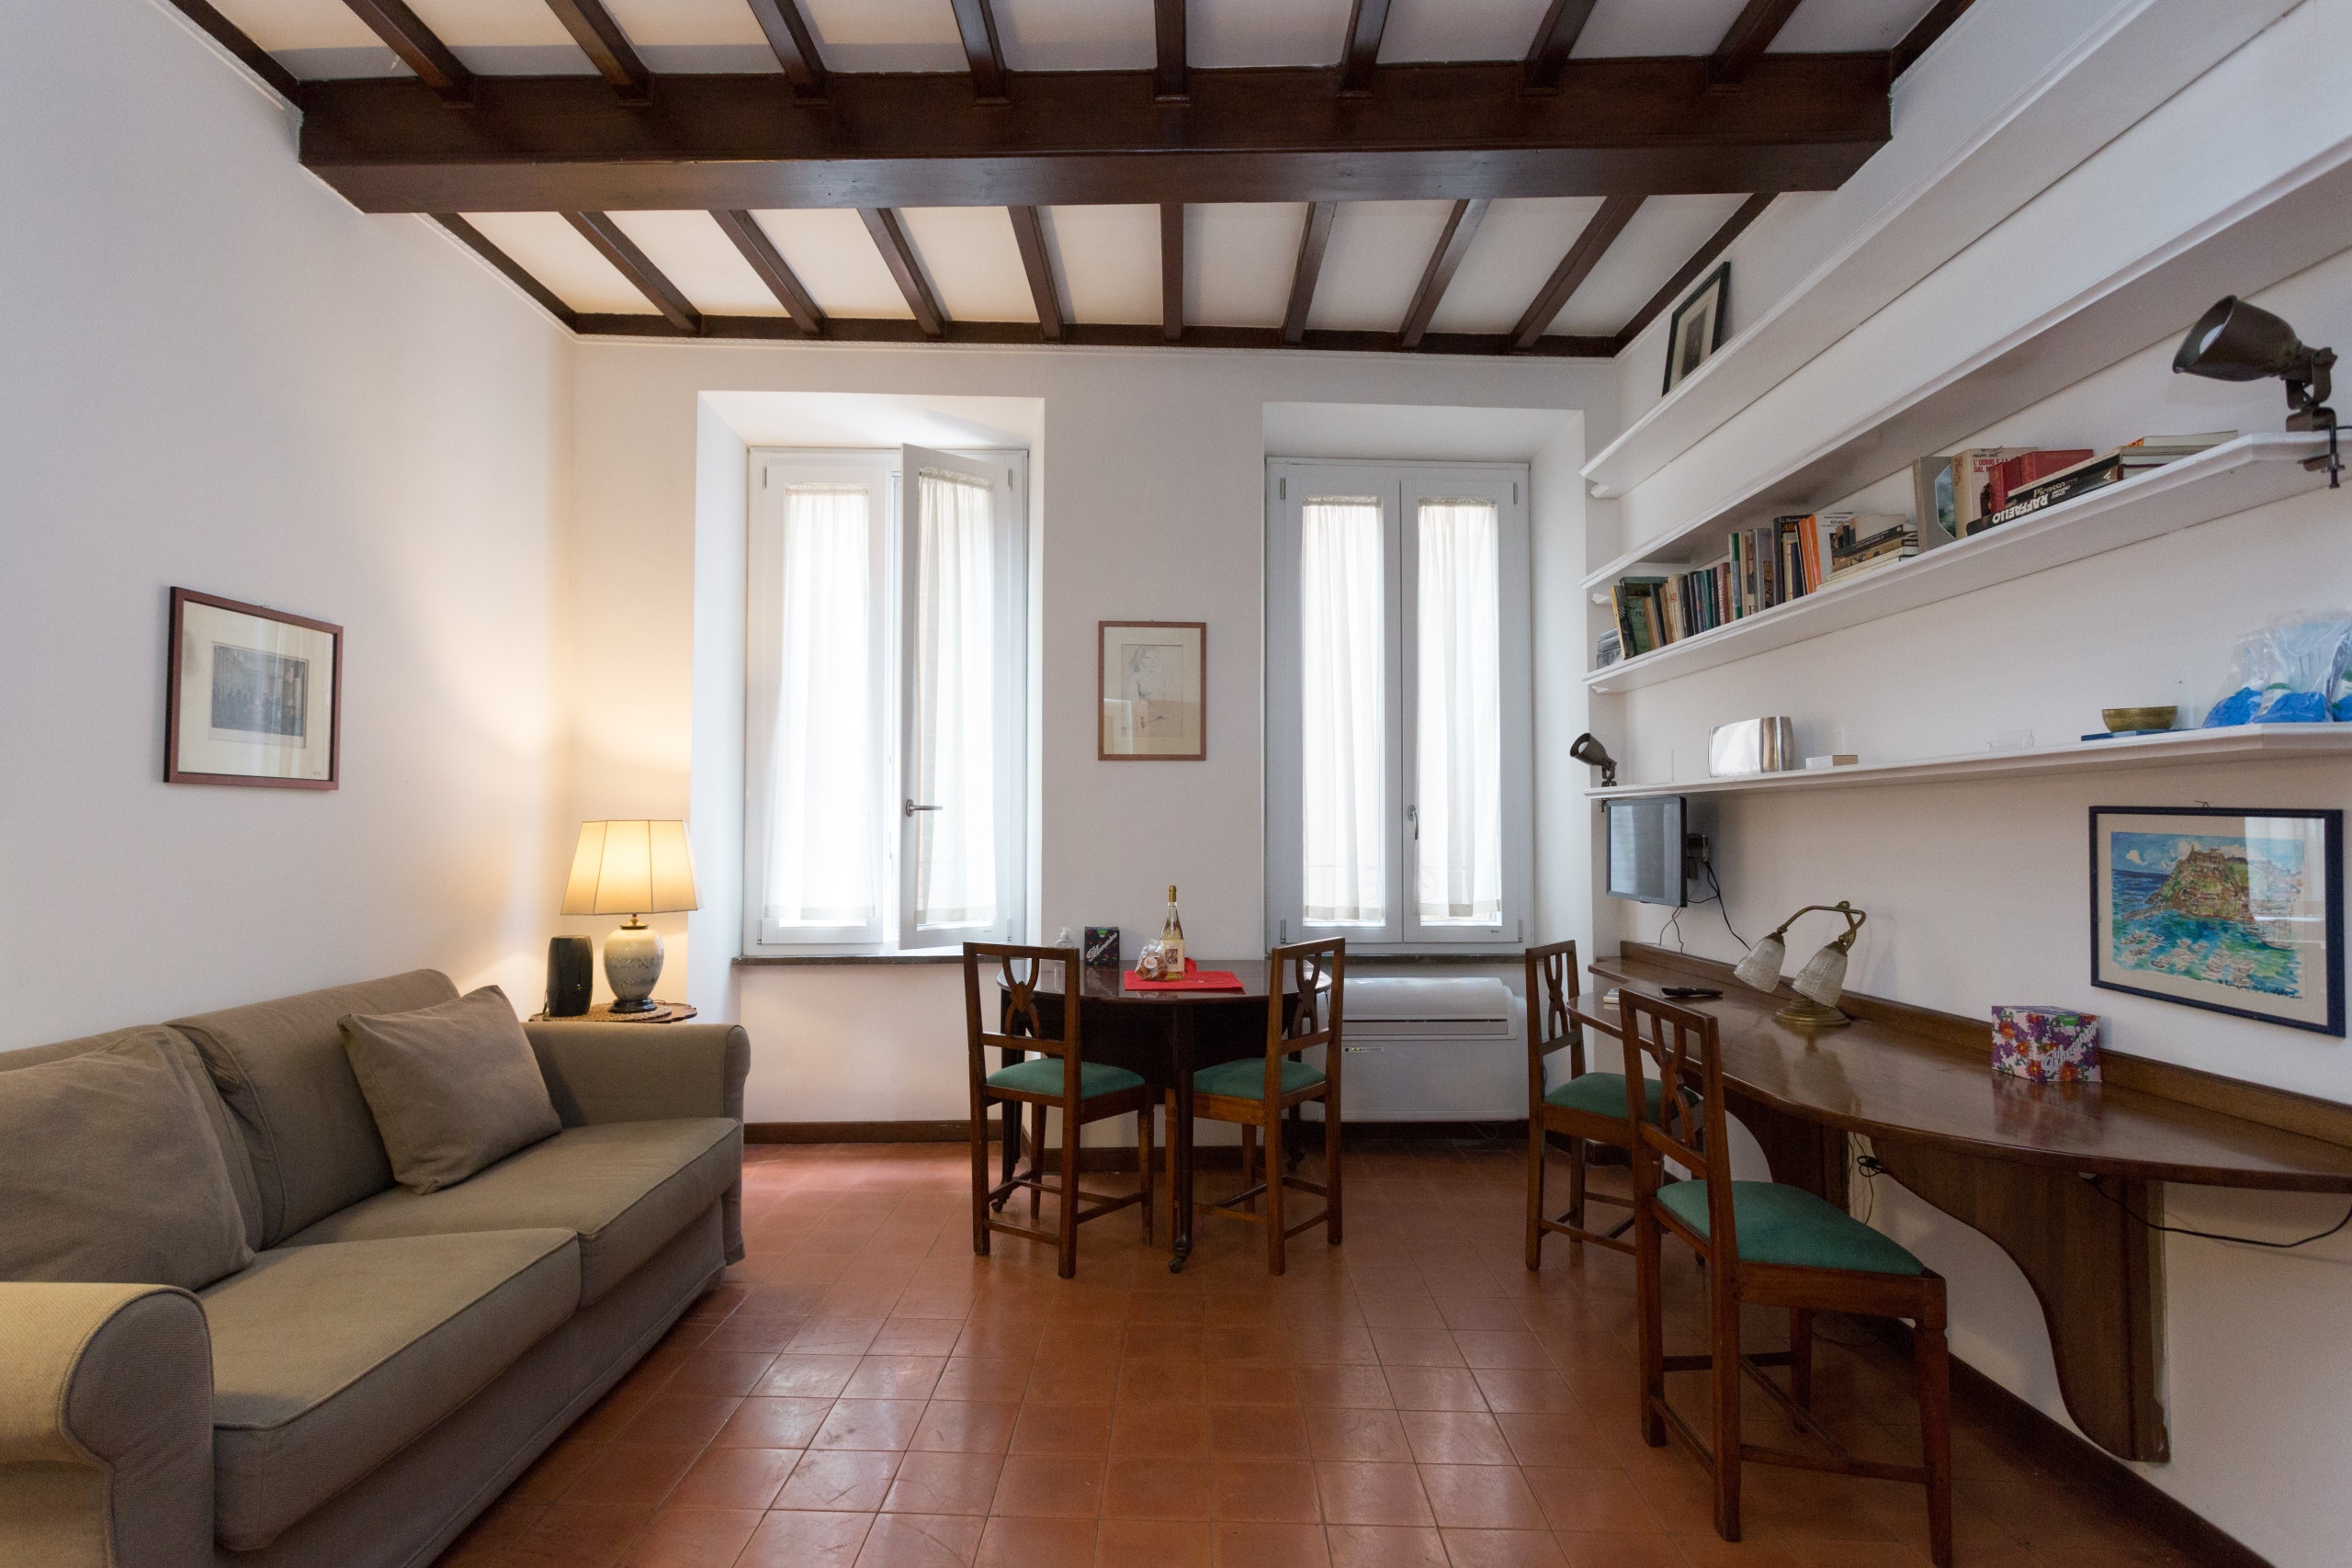 Property Image 1 - Bright Airy Flat next to Camp de Fiori and Nice Cafes